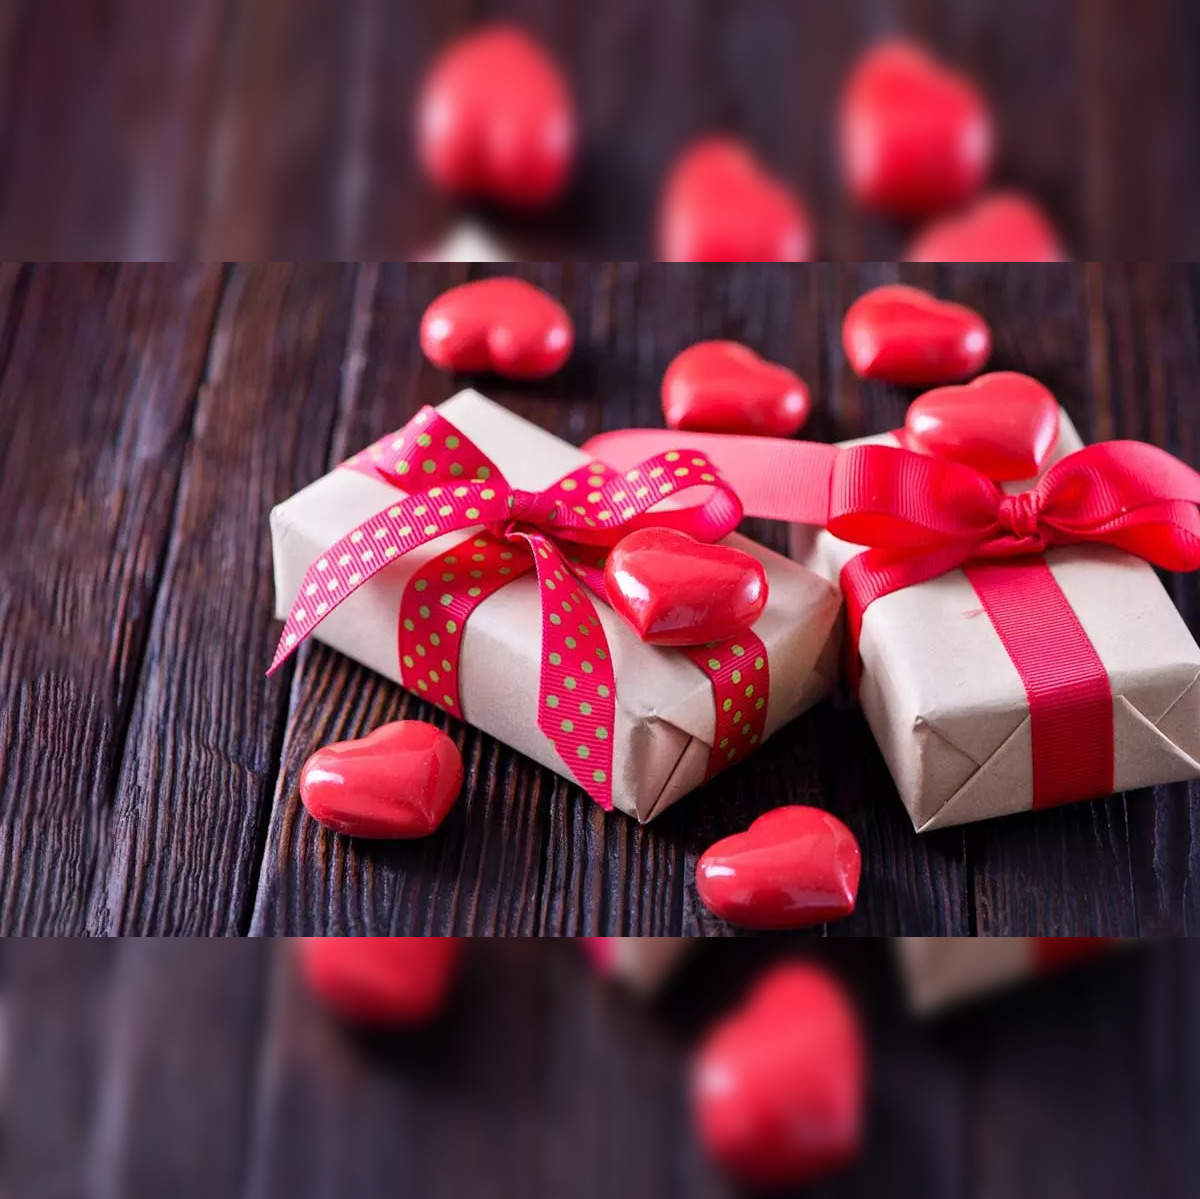 Tanishq - This Valentine's Day, gift your loved one... | Facebook